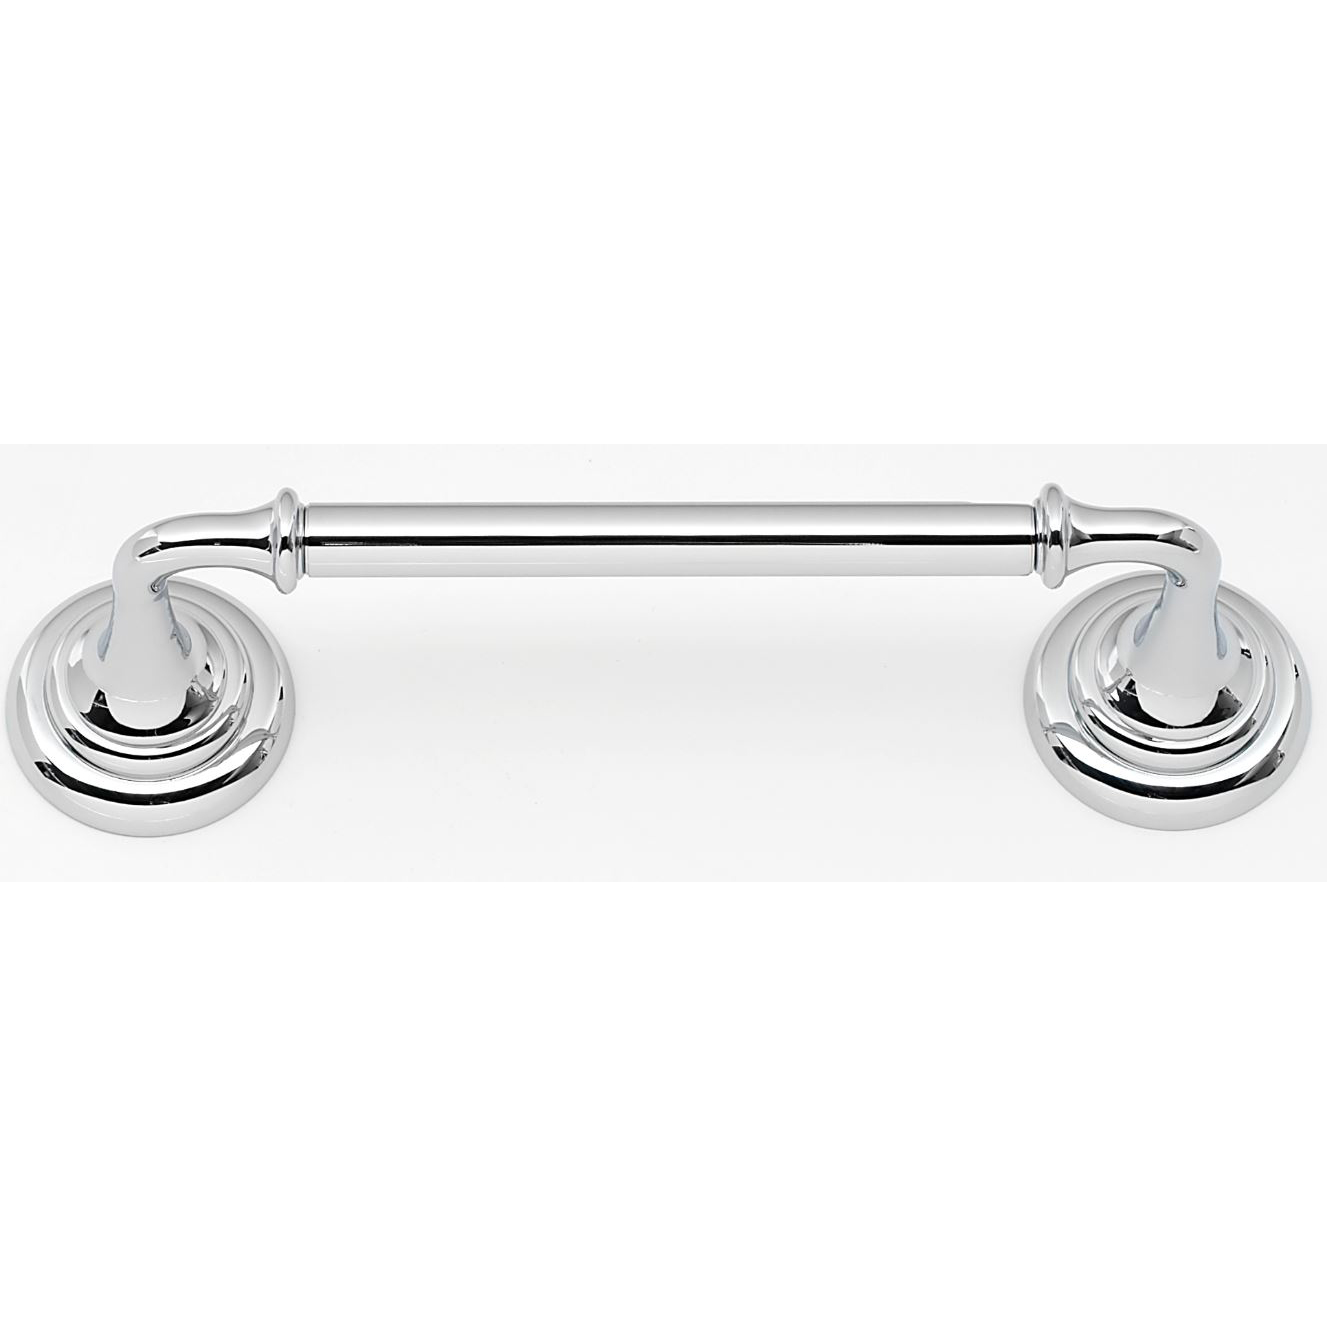 Charlie's Swing Toilet Paper Holder in Polished Chrome